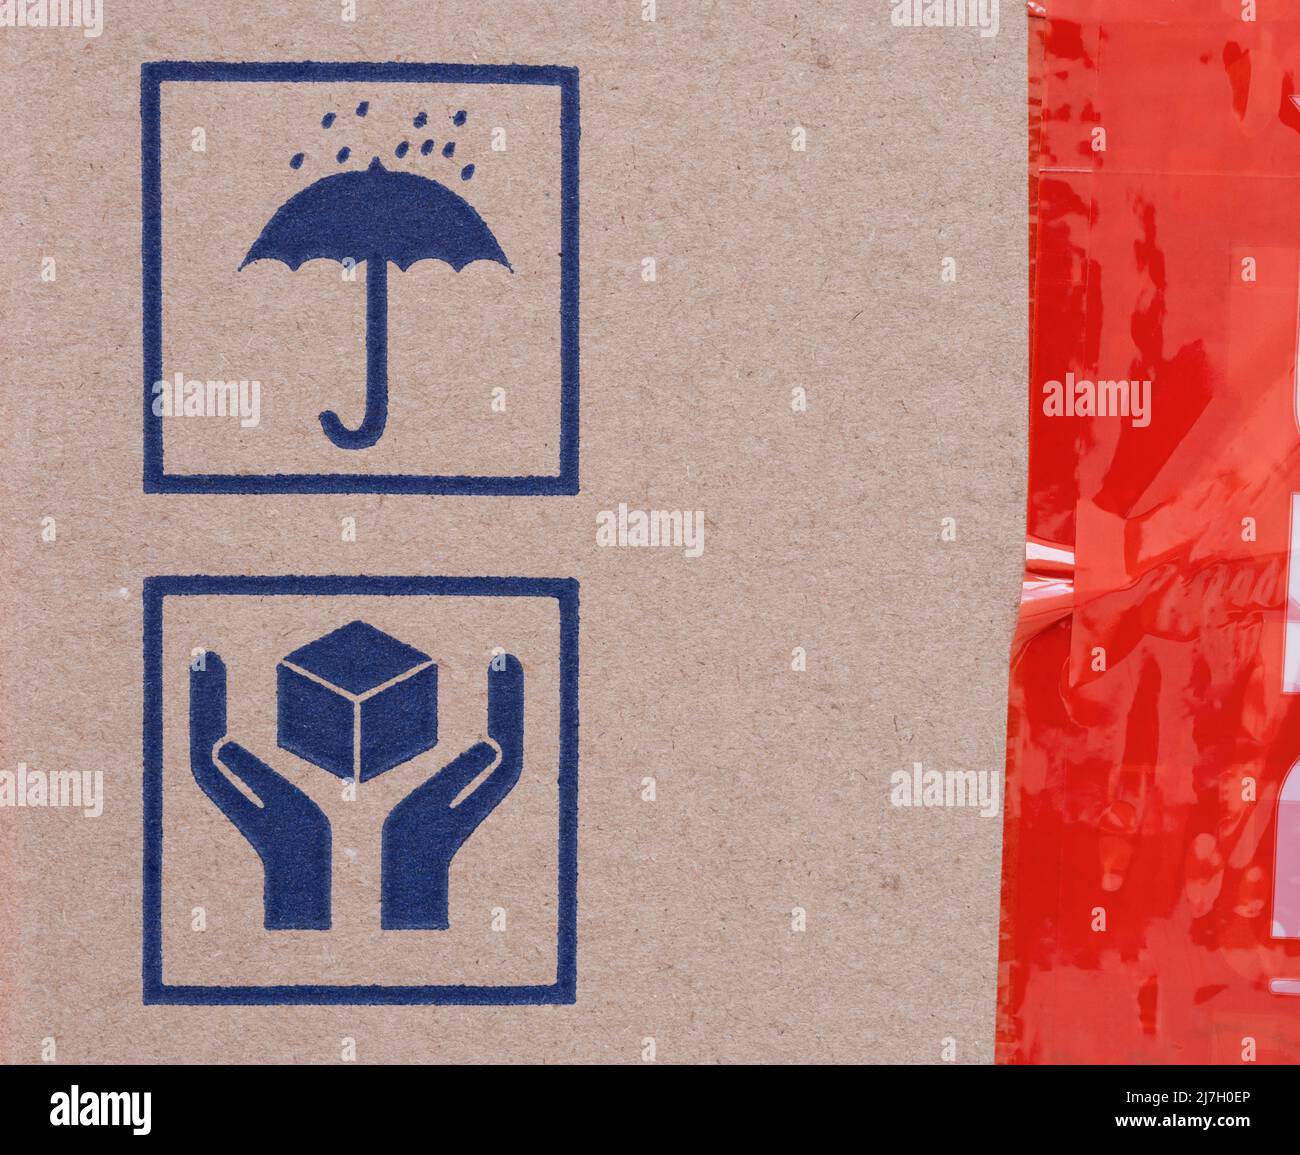 Two signs on cardboard box - Umbrella and Handle with Care, and a red scotch tape on a cardboard Stock Photo